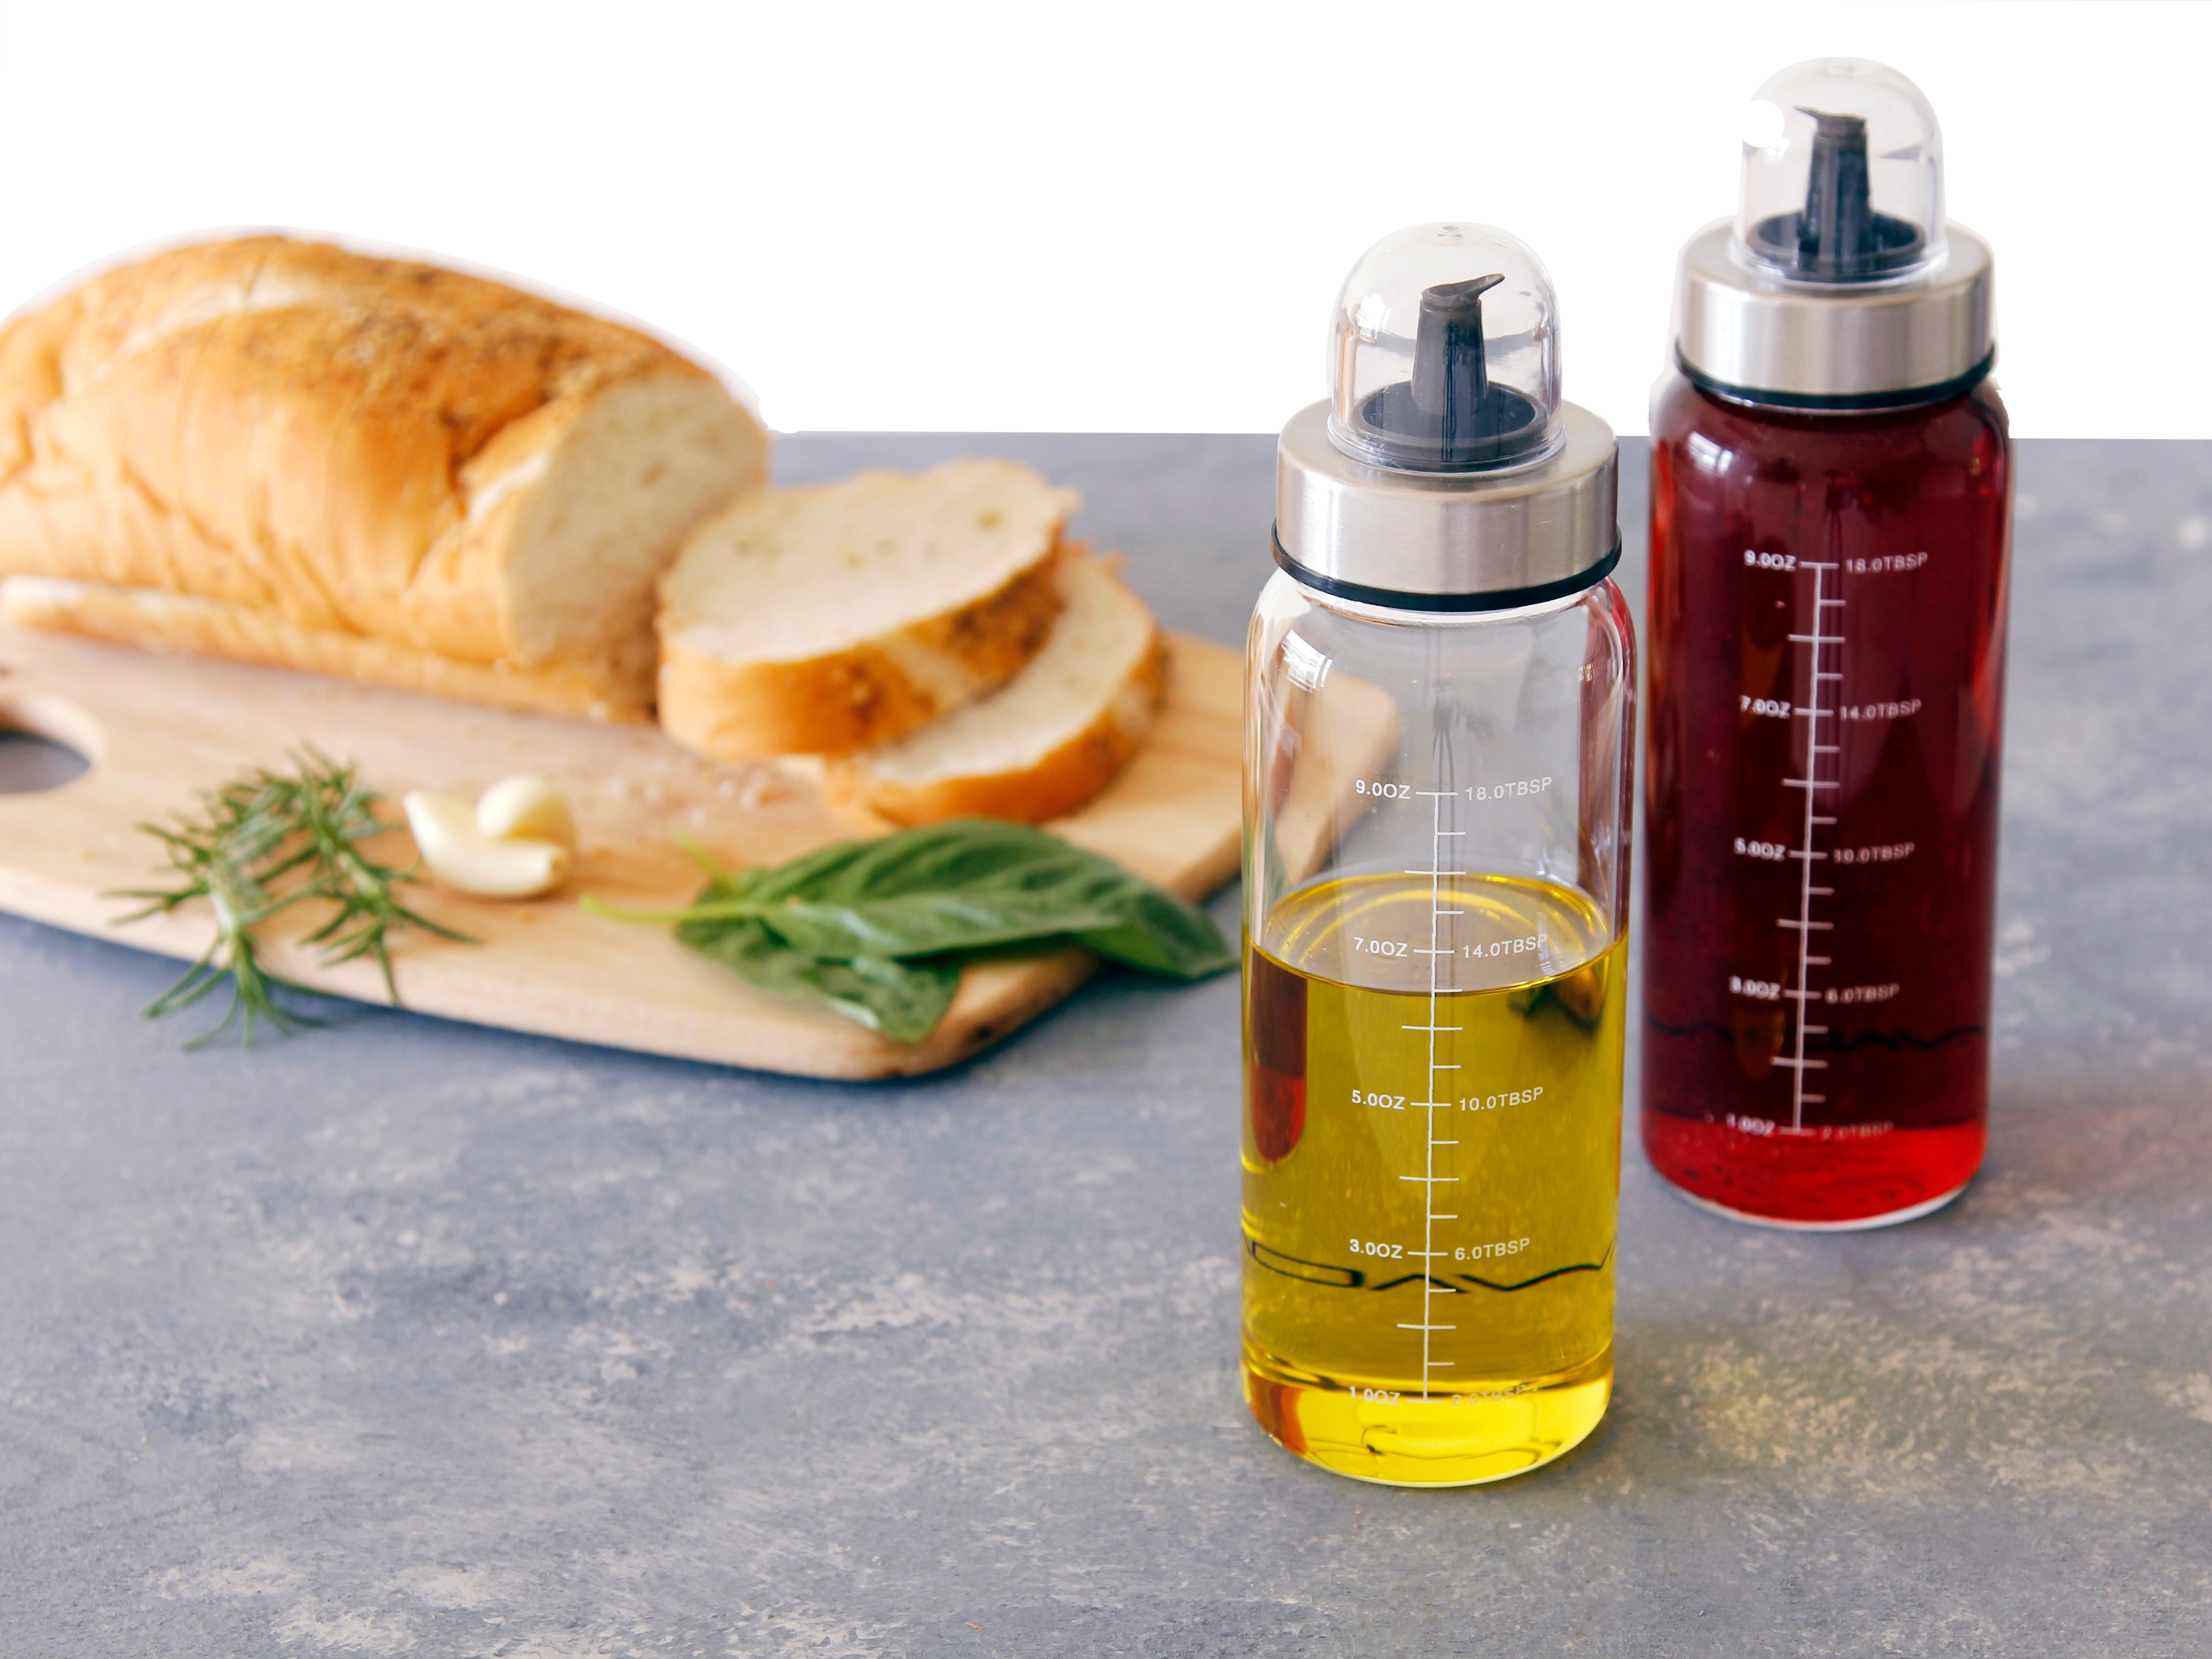 AVACRAFT Glass Olive Oil Dispenser Bottle with Pour Spouts, Measurement Marks on the Oil container for Healthy Cooking, Oil and Vinegar Dispenser 10OZ, Set of Two (OC3)